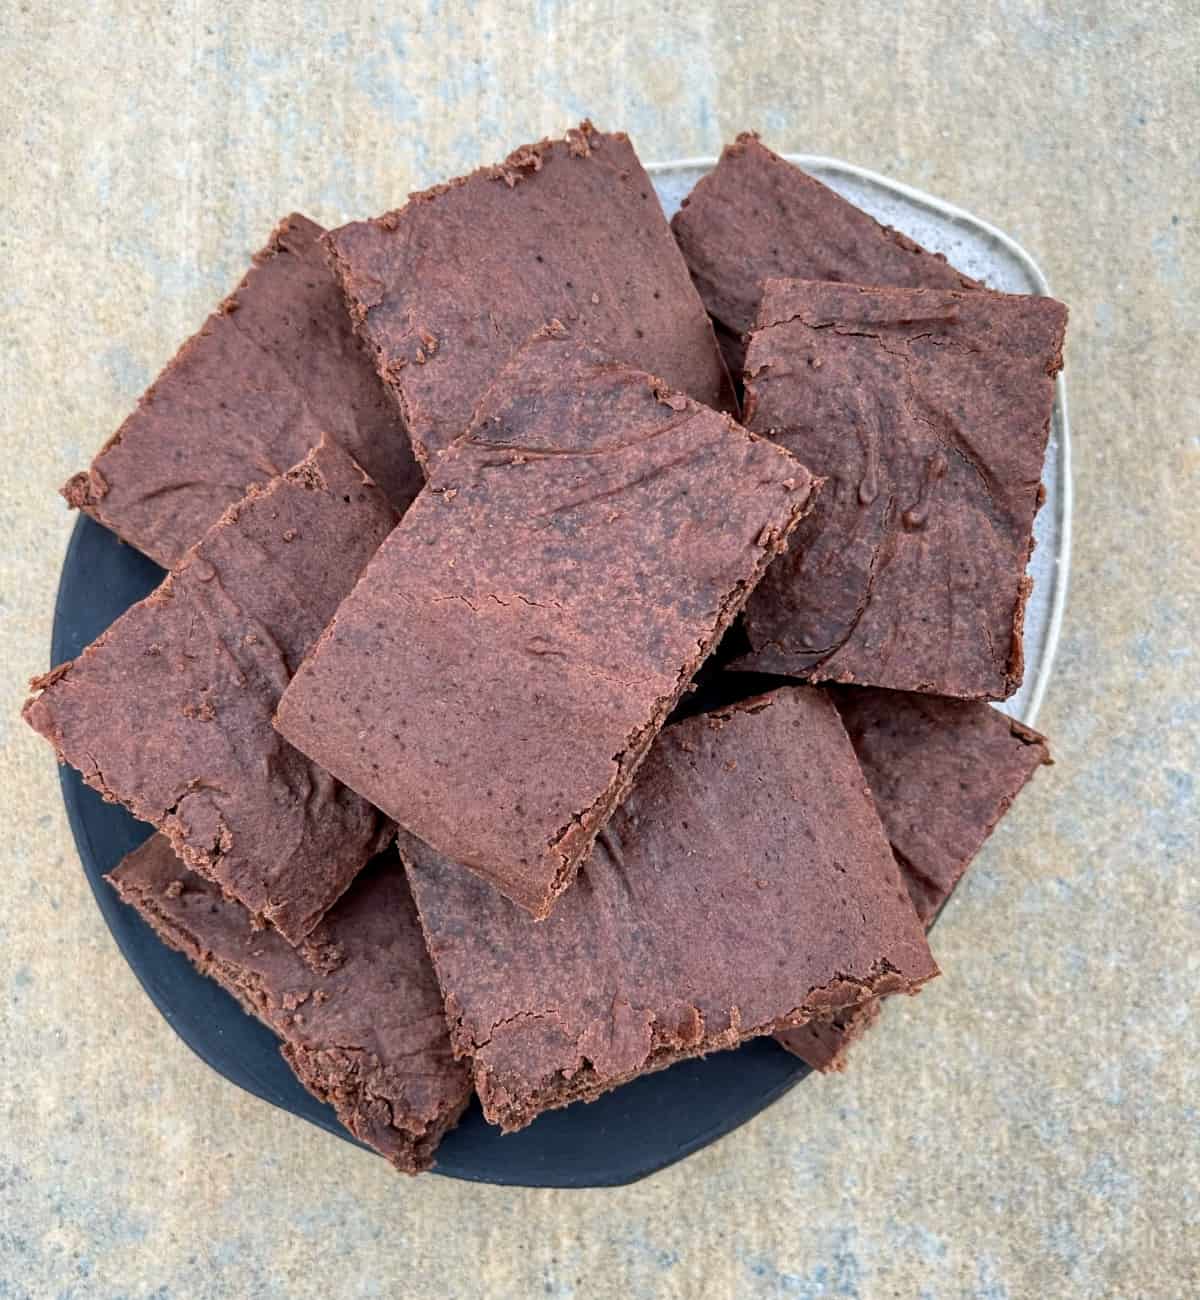 Halo Top chocolate fudge brownies stacked on ceramic serving plate.